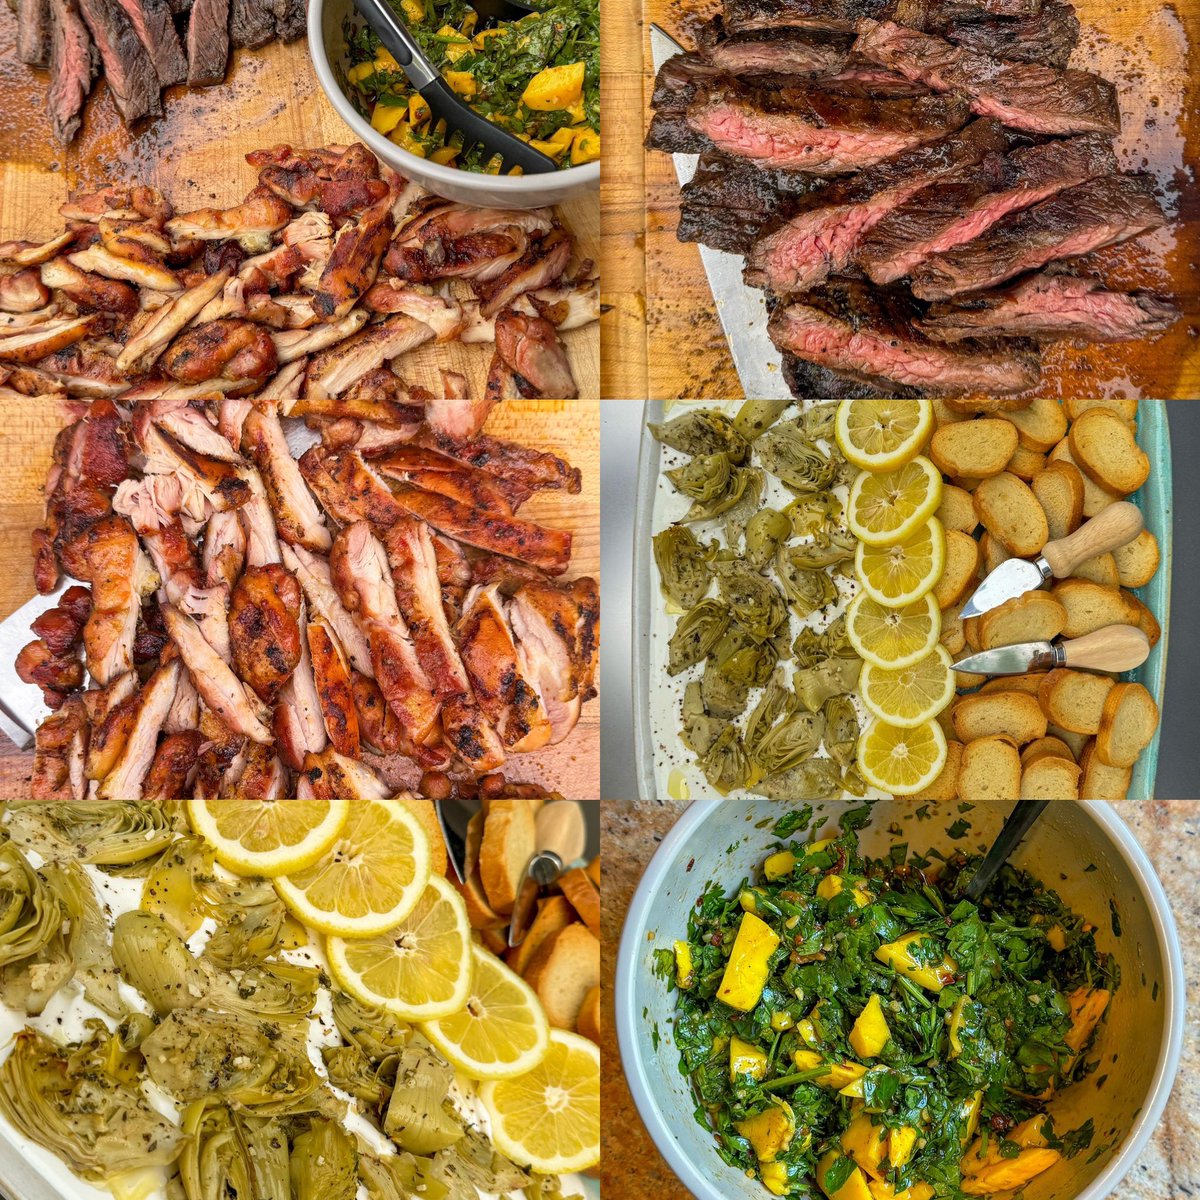 The aftermath, charcoal skirt steak with a coffee/black garlic rub and spicy mango chimmichurri. A goat cheese yogurt dip with marinated artichoke and crustini. Finally smoked Thighs with Texas sugar honey rub. Pull up a chair, thank the Lord and dig in!